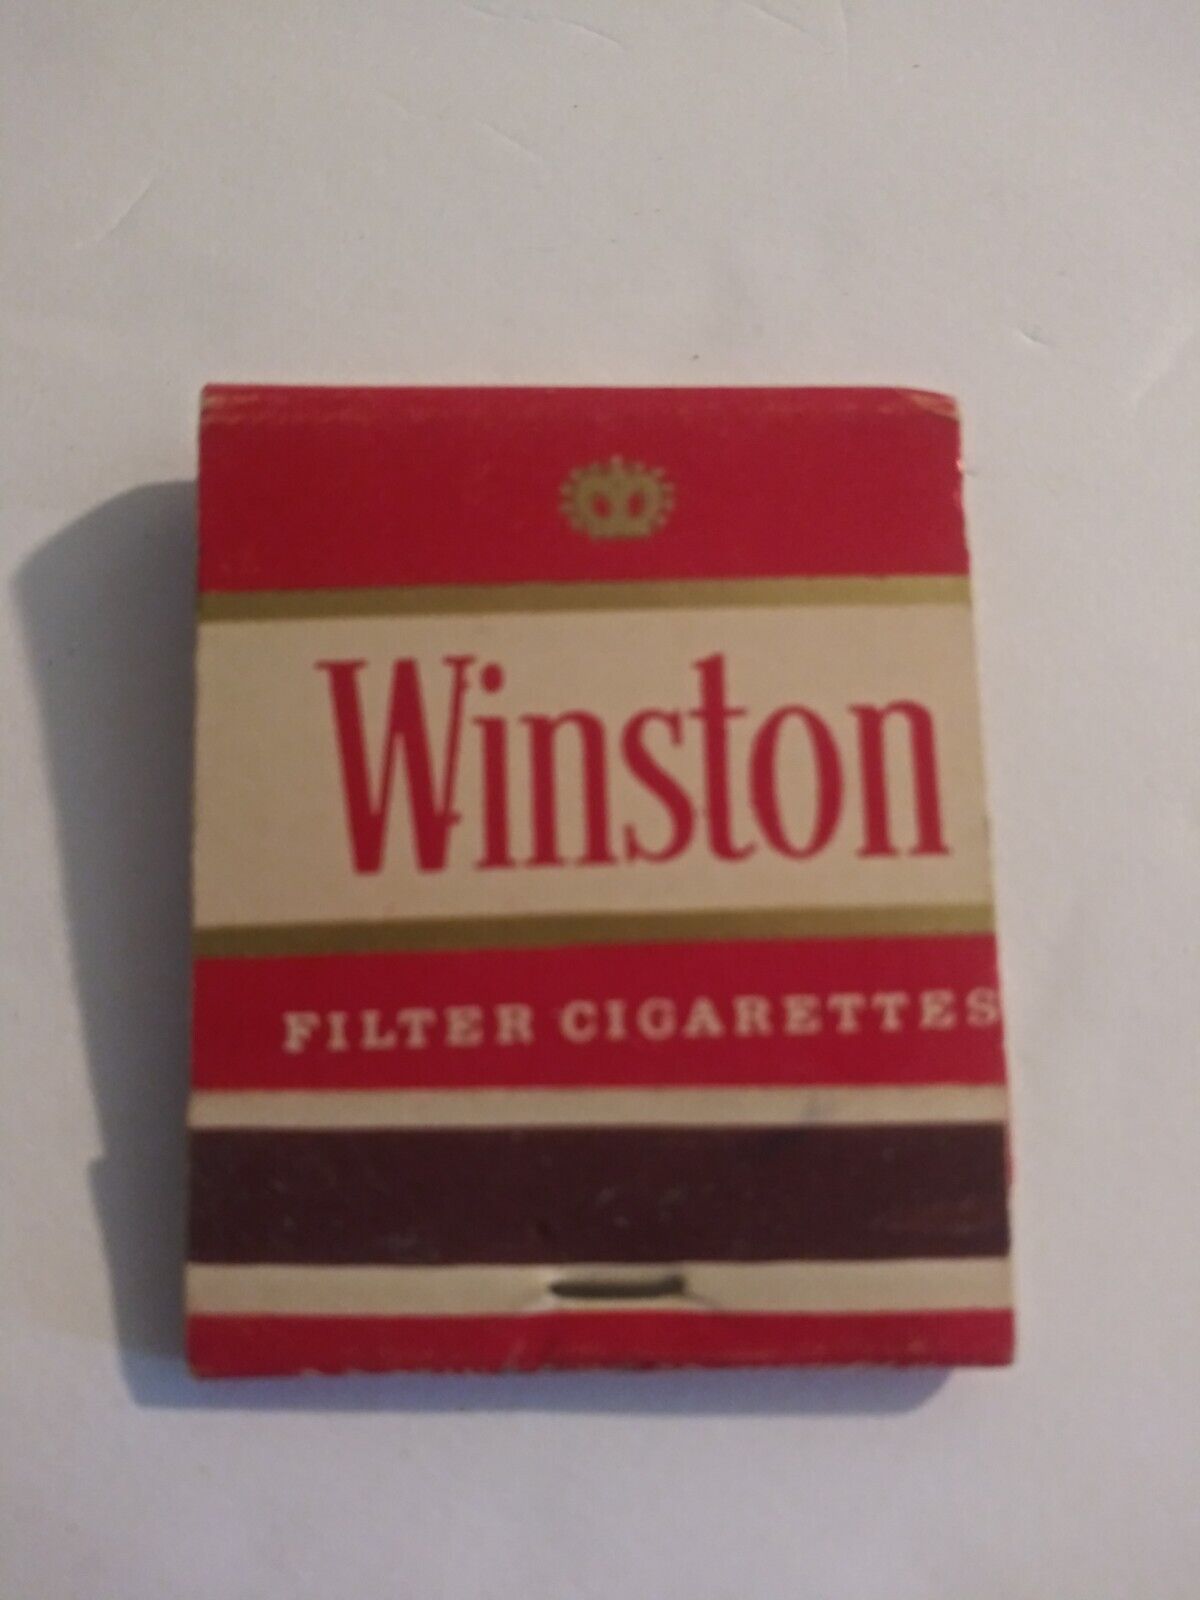 Vintage Matches From Winston Filter Cigarettes